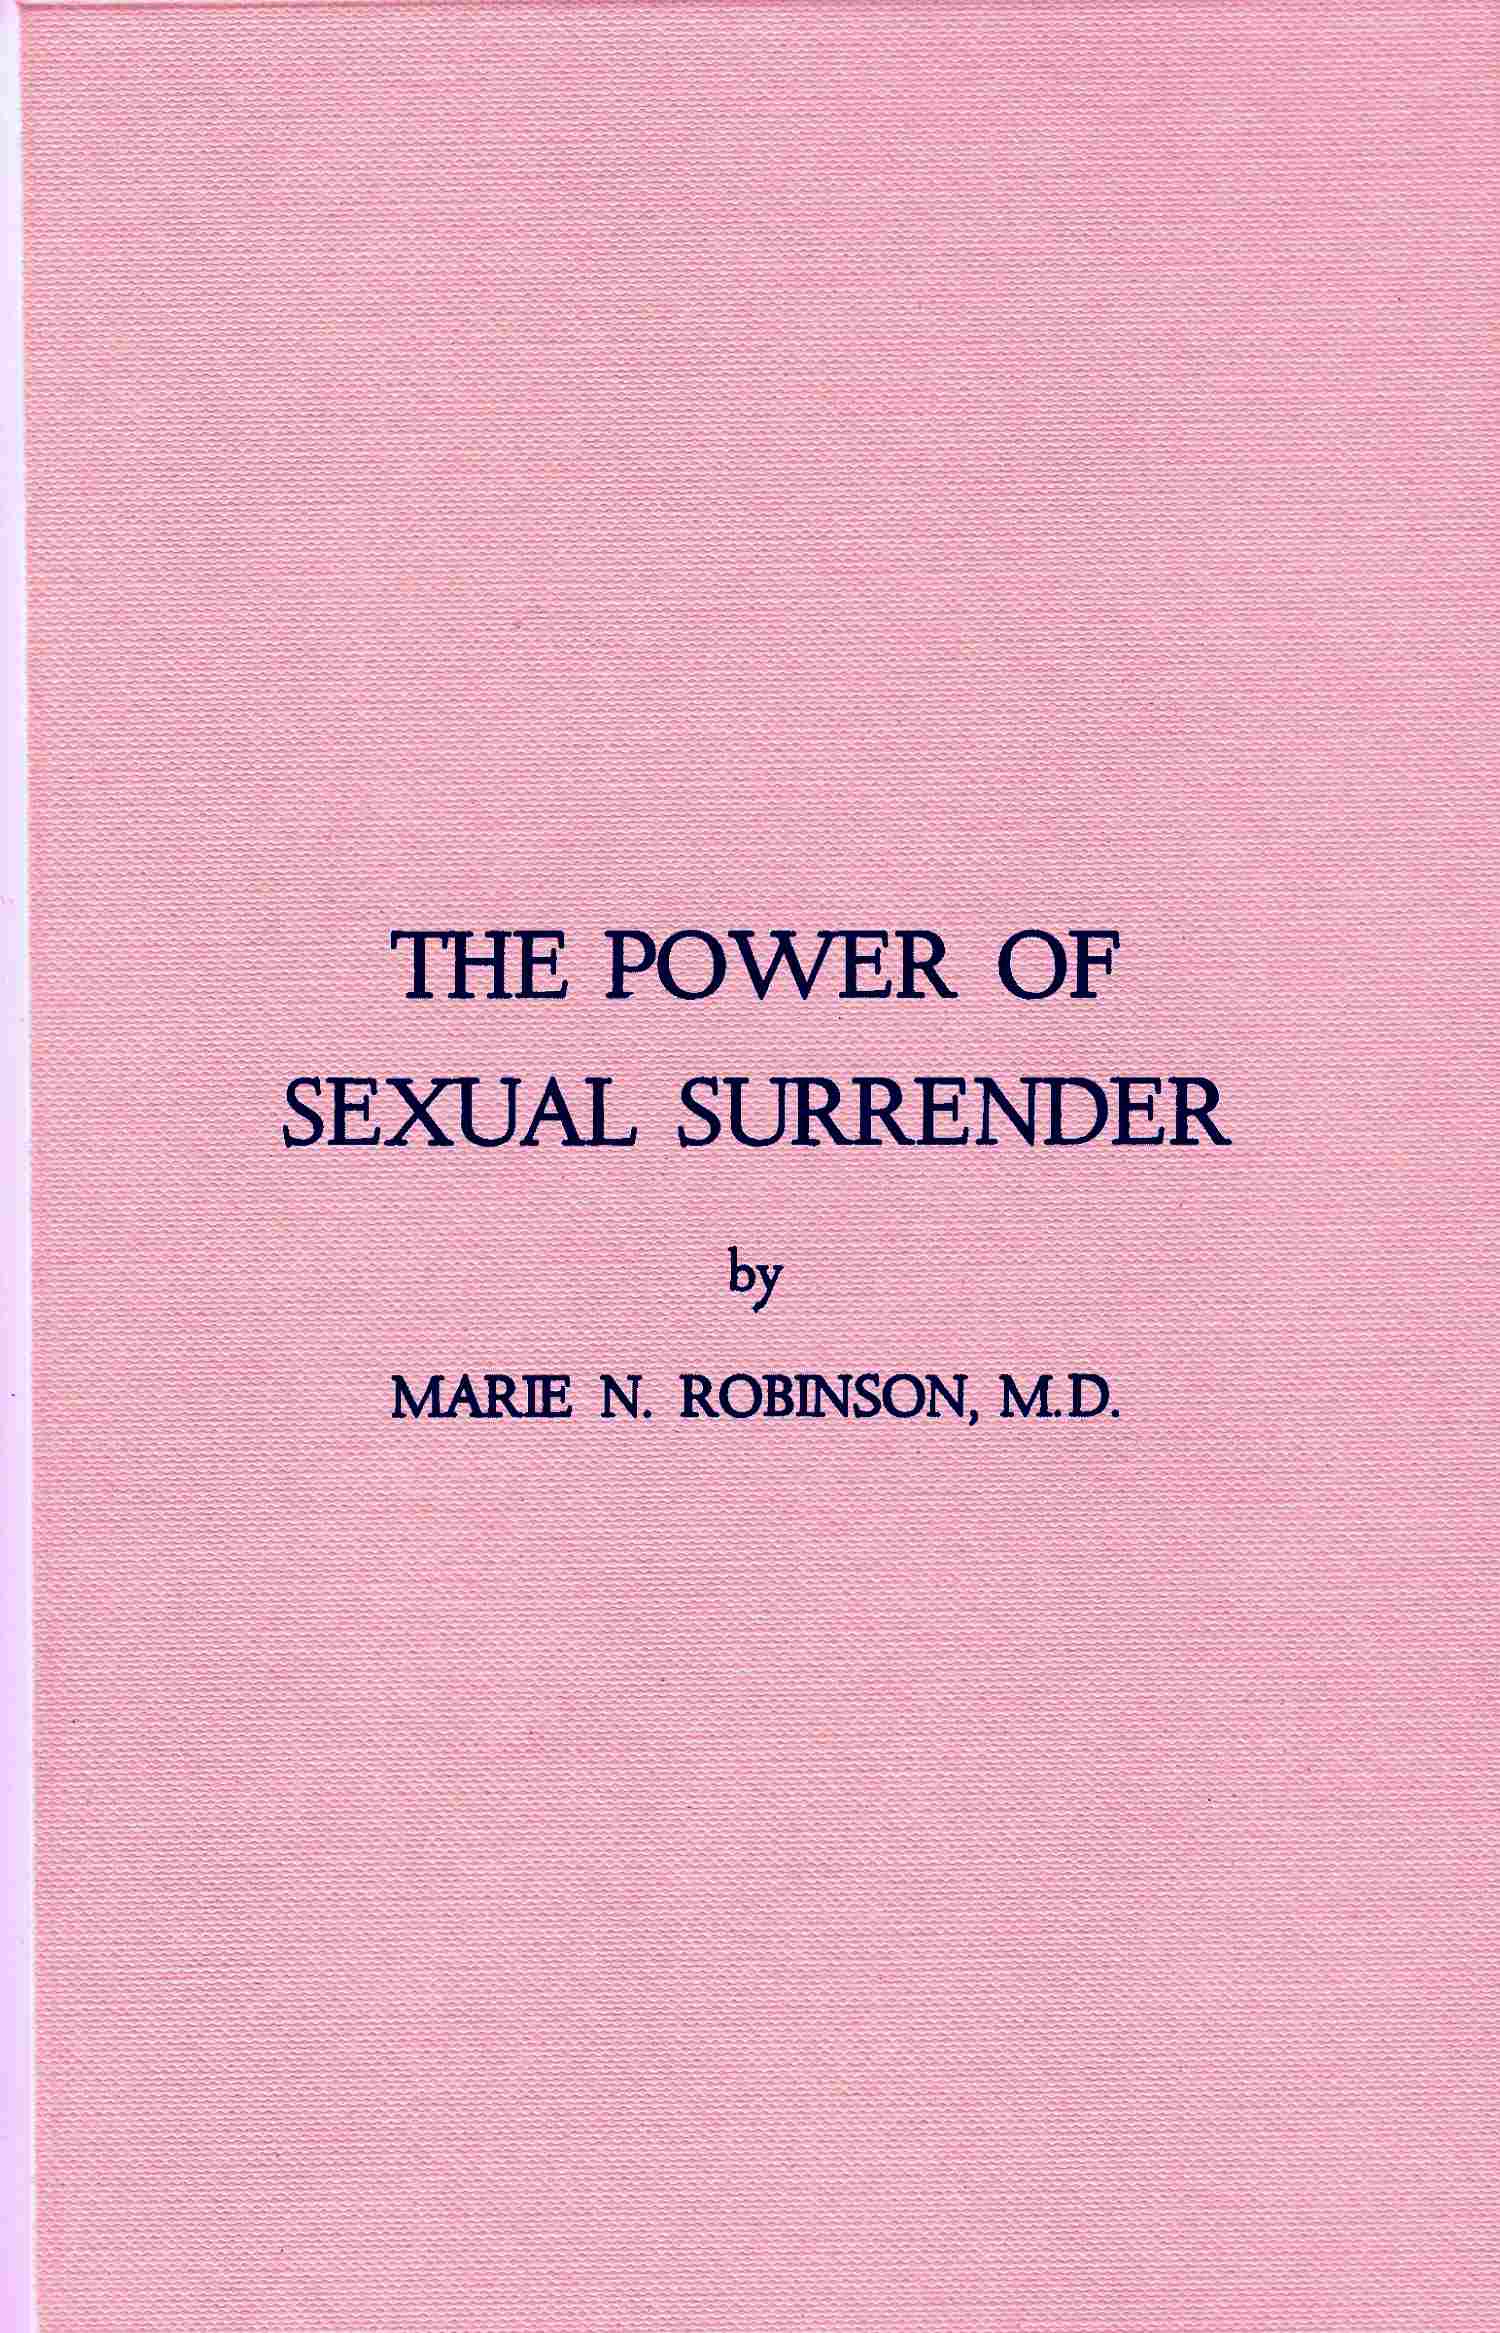 The Power of Sexual Surrender